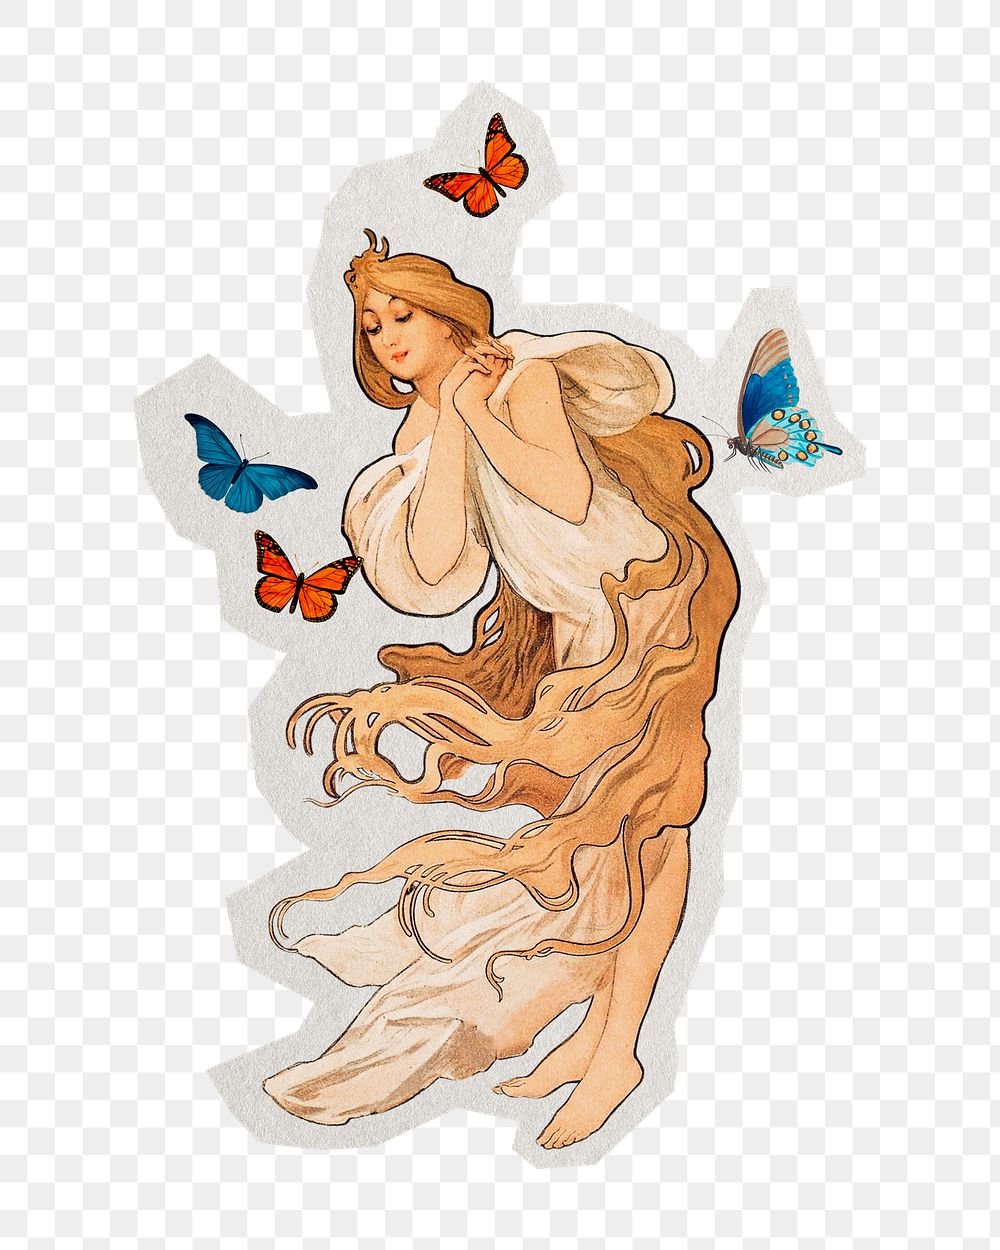 PNG Mucha's woman sticker with white border, transparent background, artwork remixed by rawpixel.